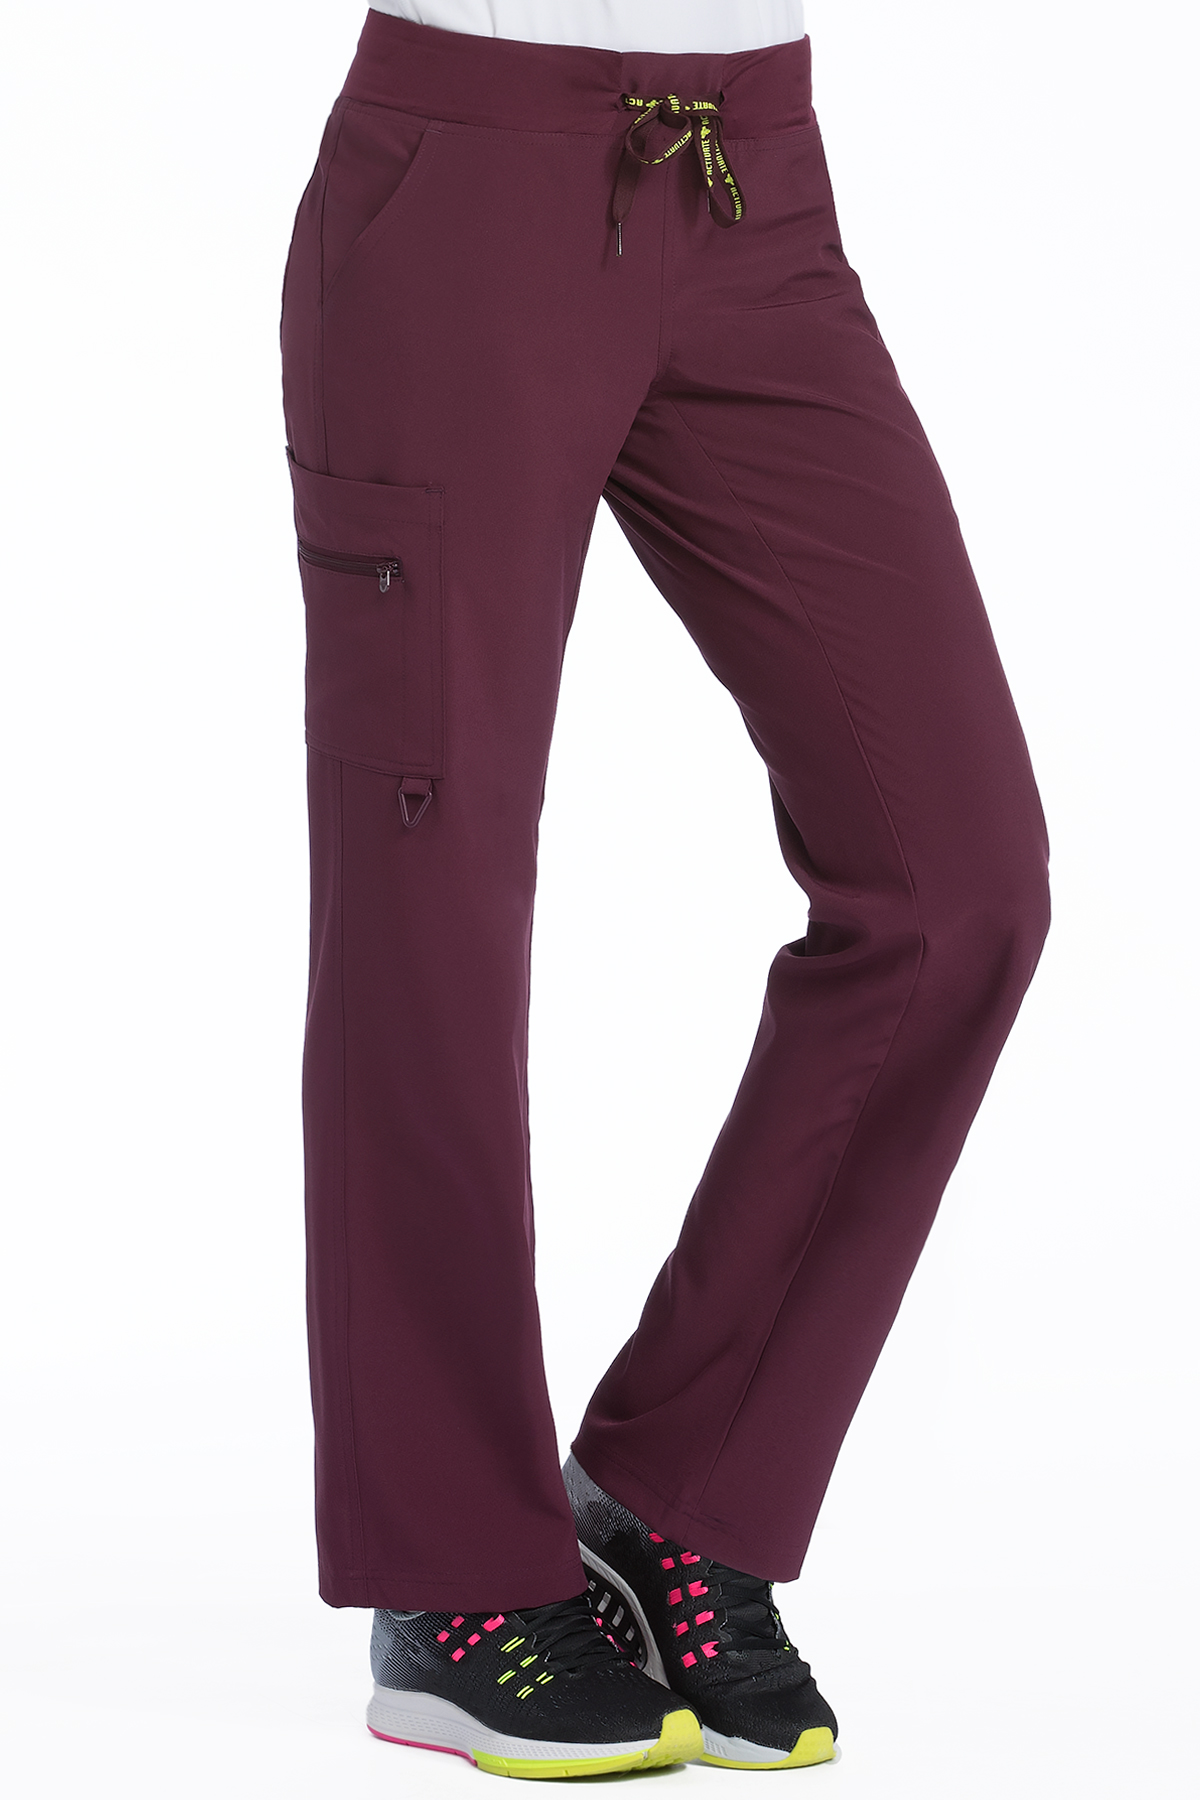 Med Couture Activate Women's Yoga One Pocket Cargo Pant 